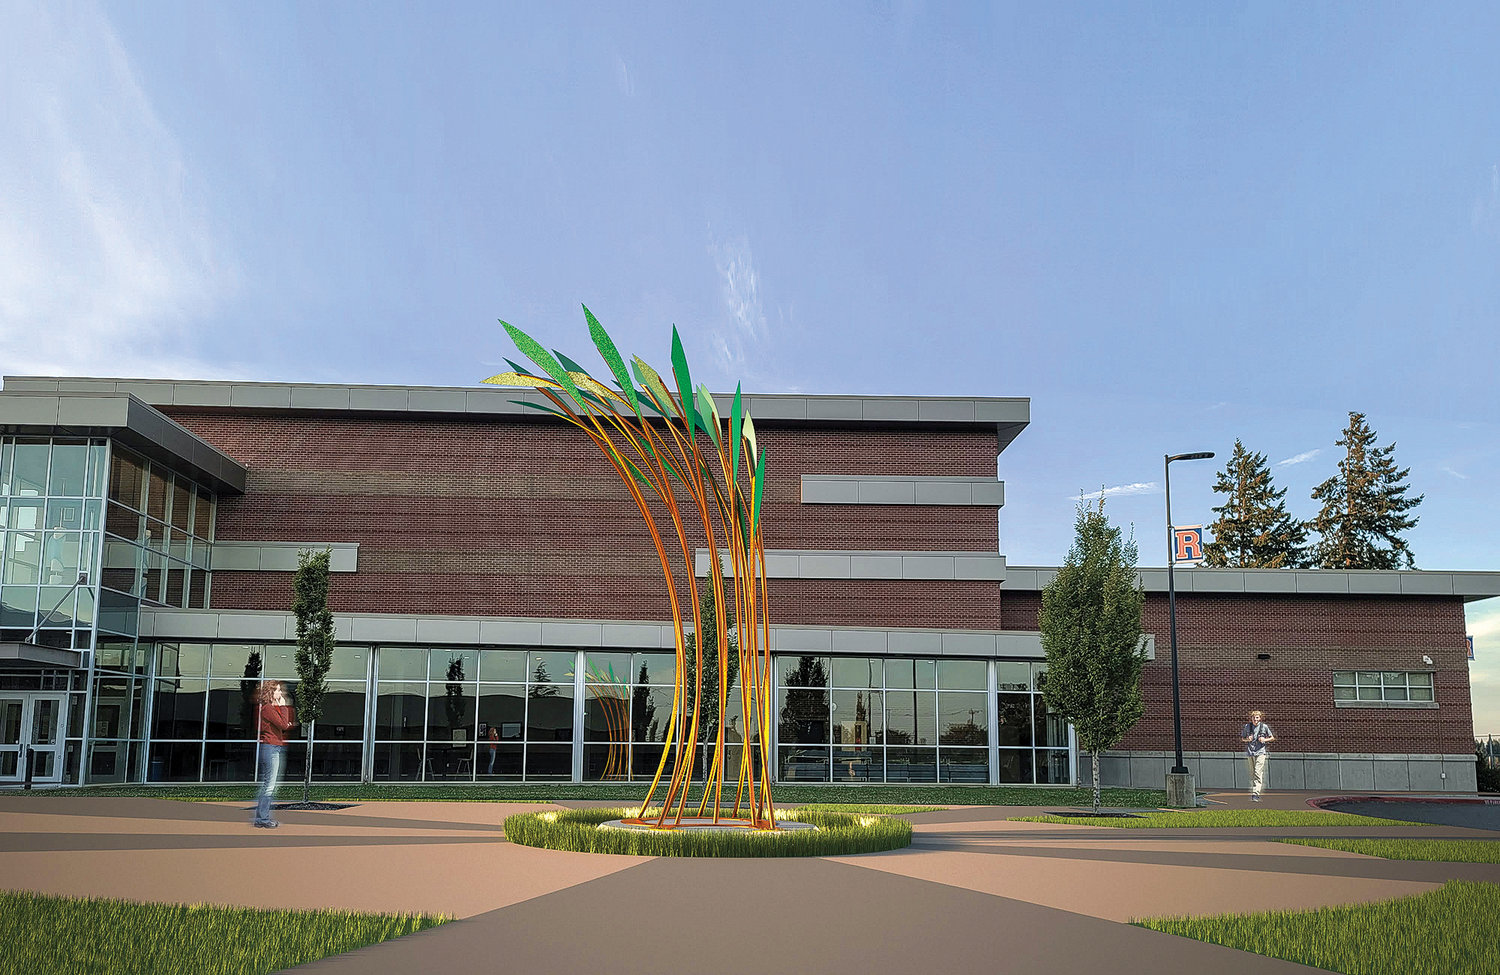 An artist's rendition of the "Tree of Life" sculpture installed at Ridgefield High School.